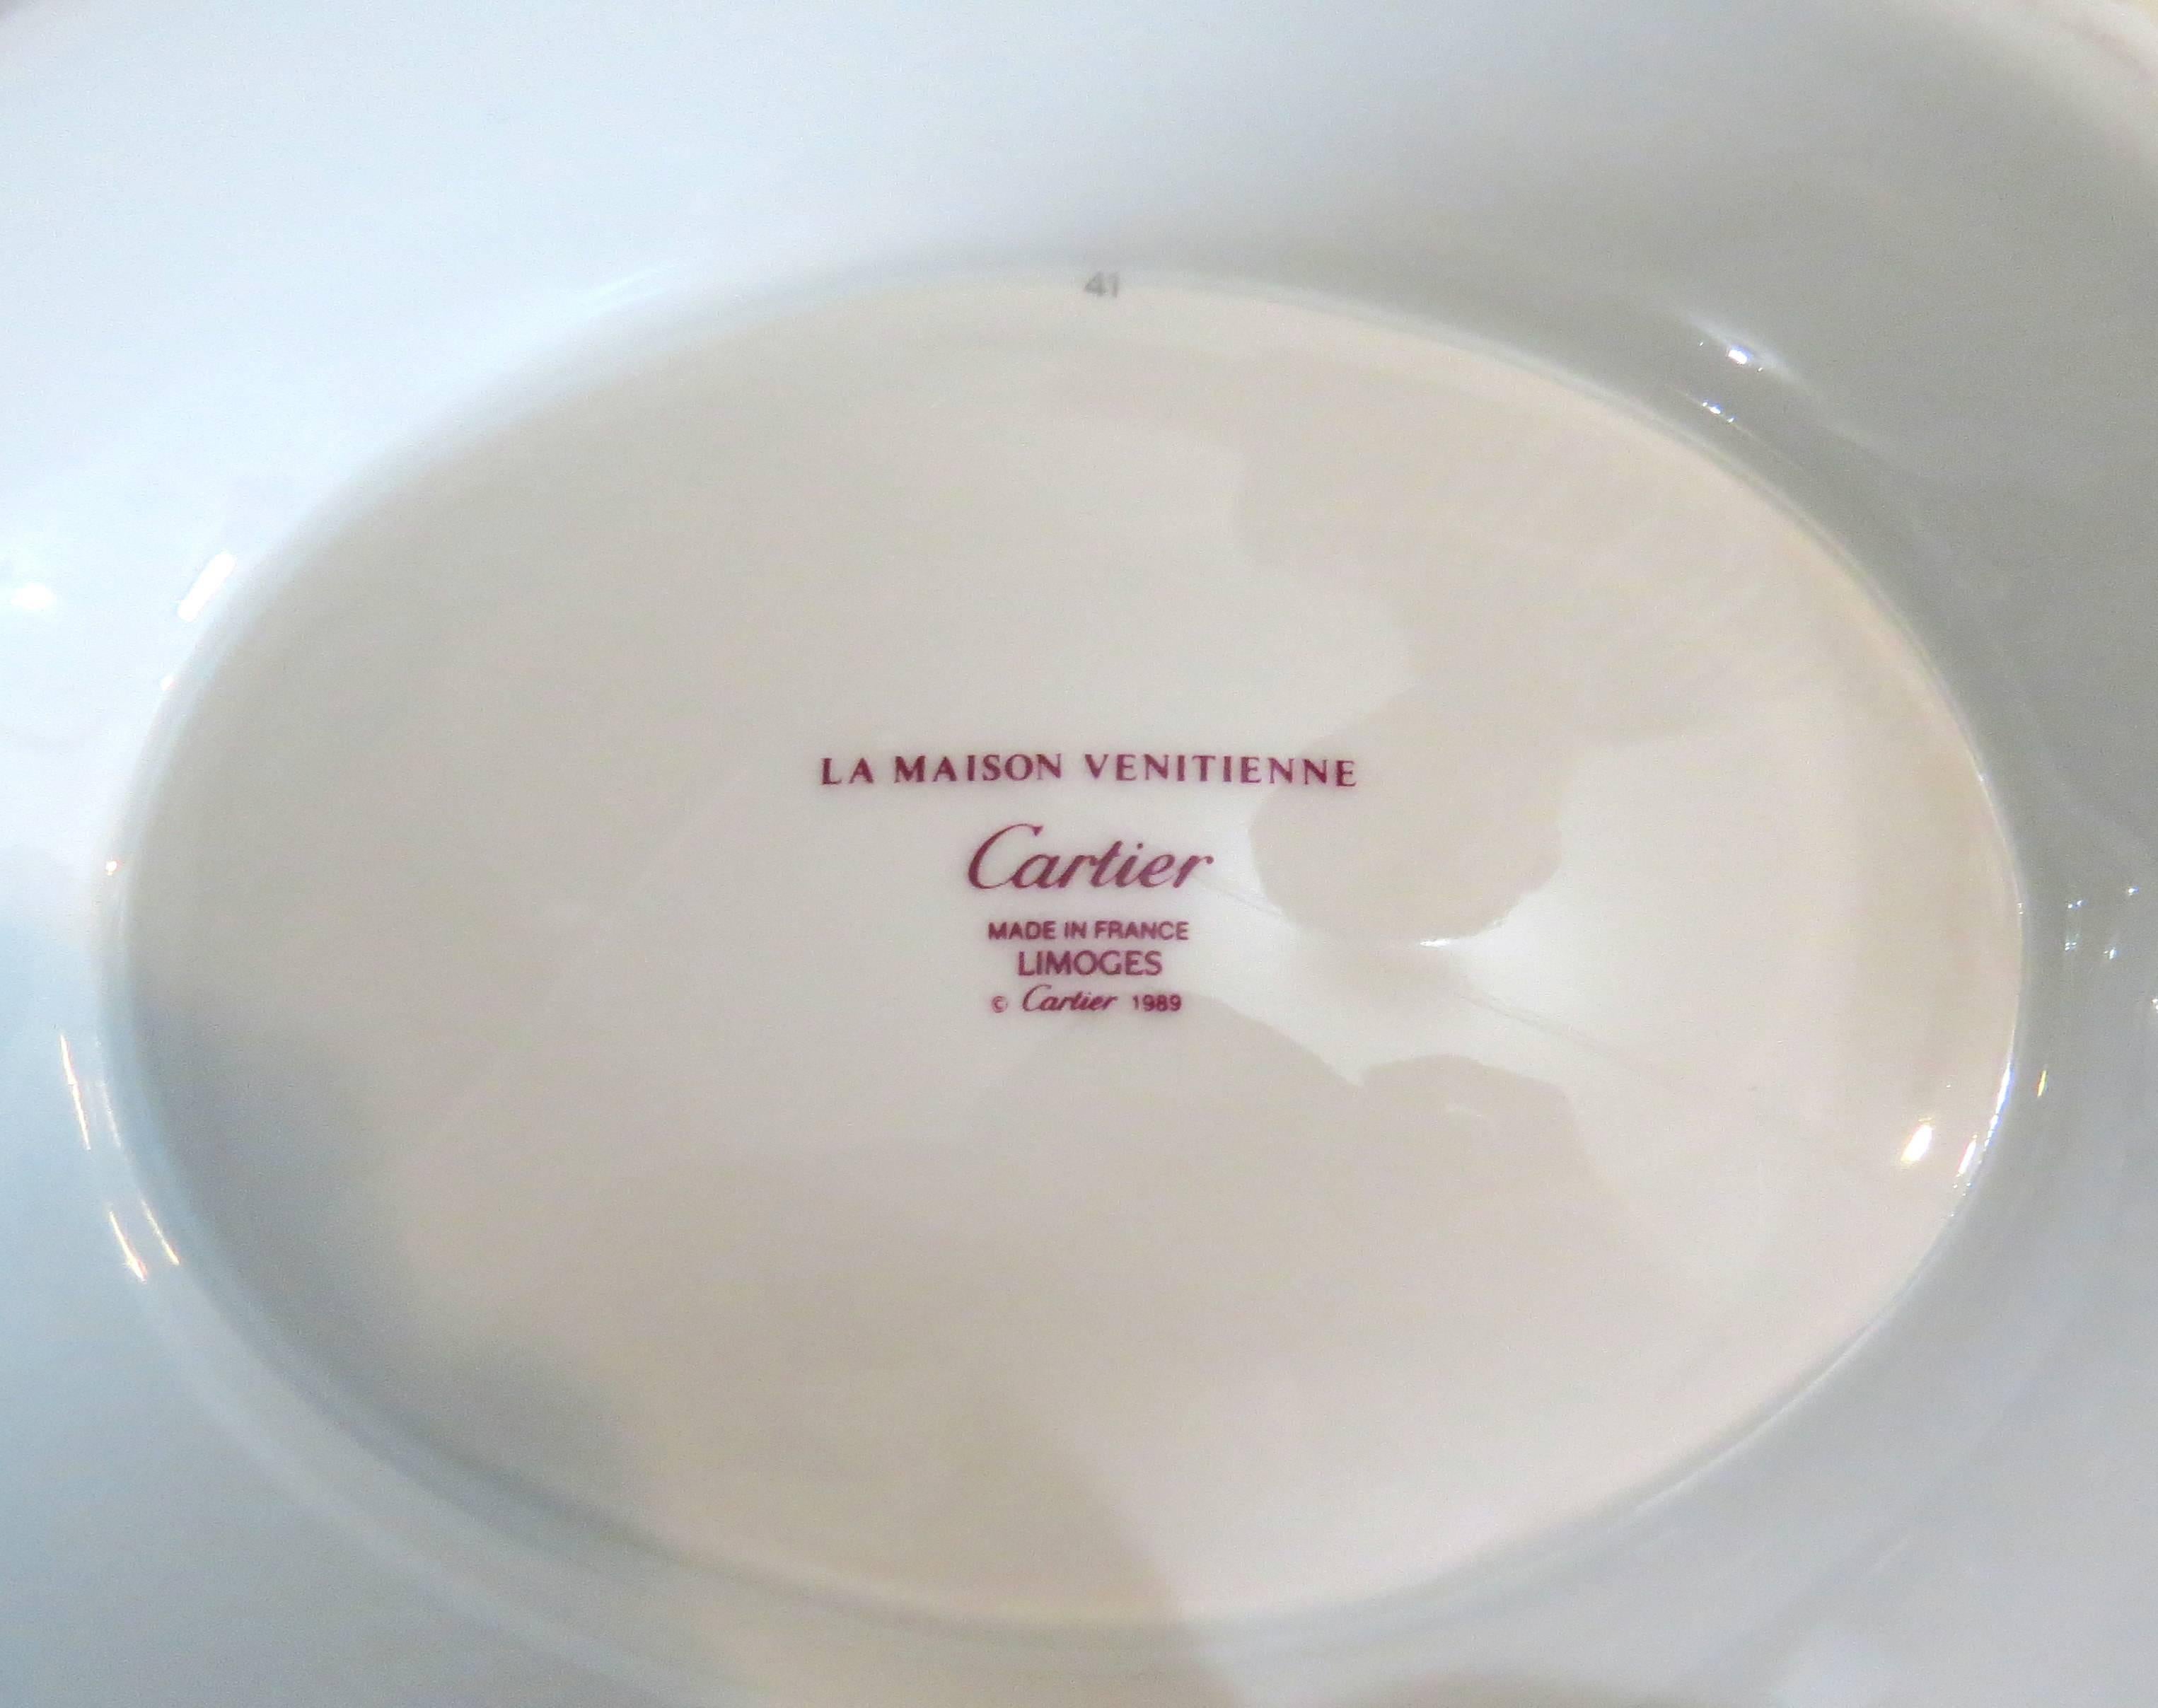 Exquisite porcelain tureen dish, crafted by Cartier for La Maison Venitienne collection, featuring lapis color decor. Tureen overall measurements are 13 1/4